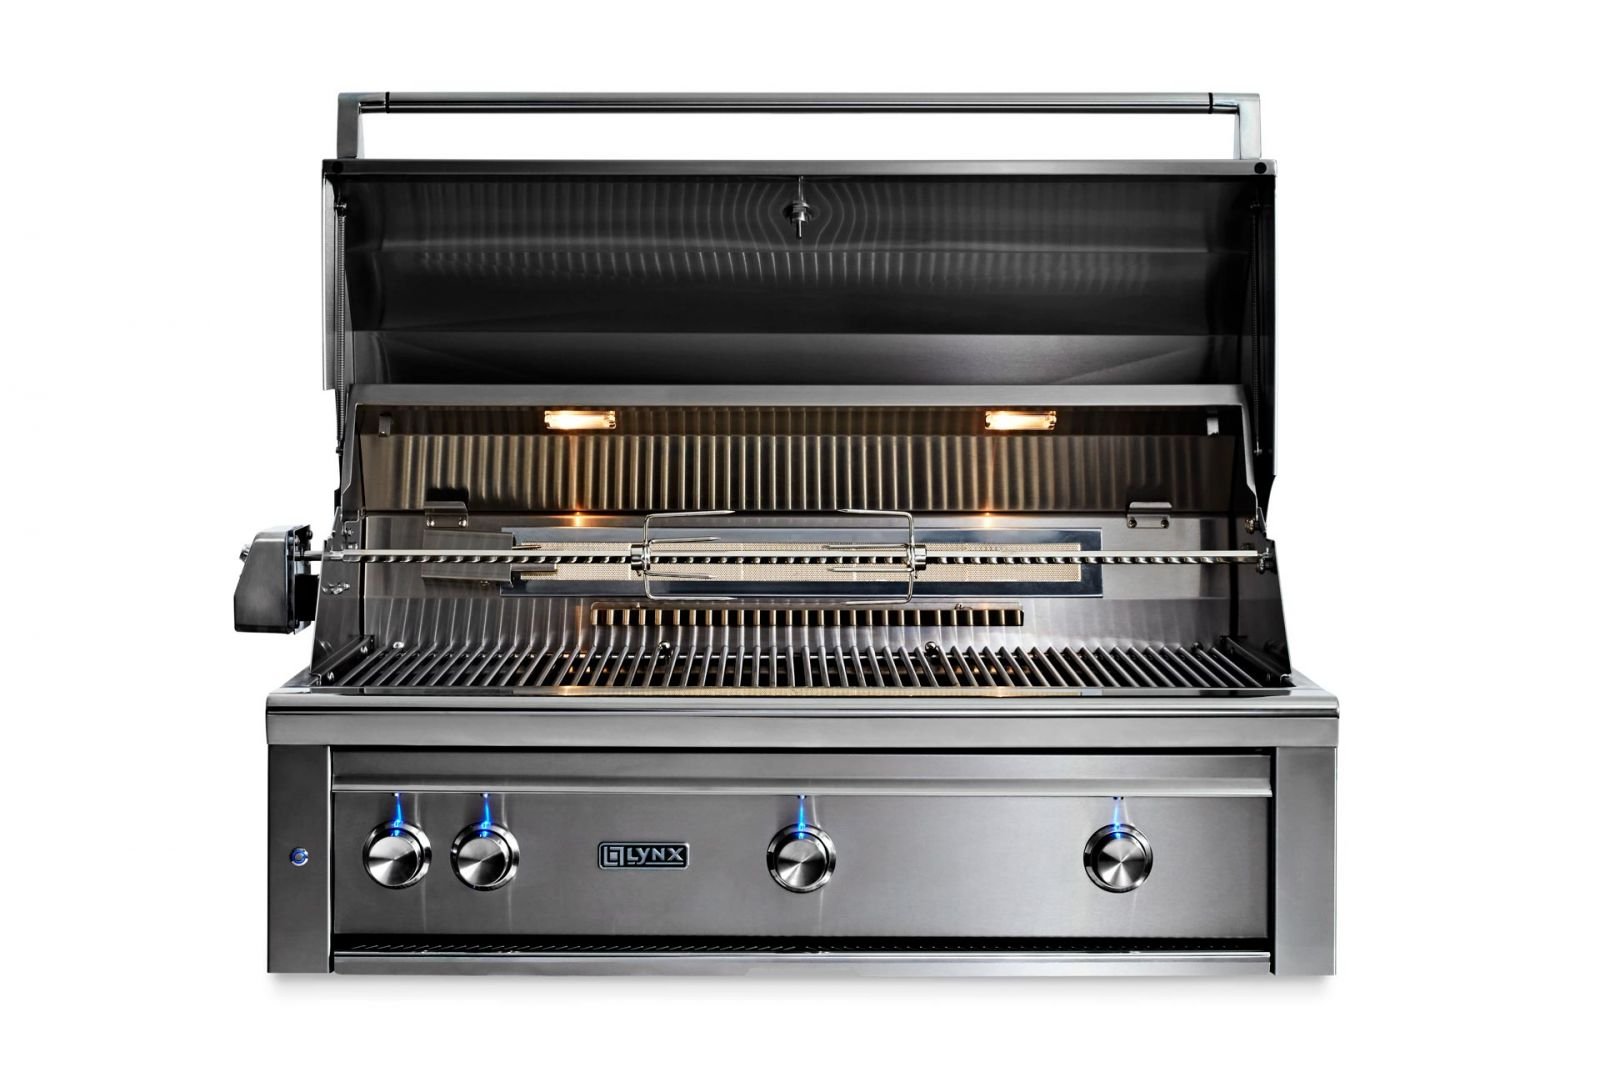 Lynx 42” Professional Built-in Grill with All Ceramic Burners and Rotisserie (L42R-3)